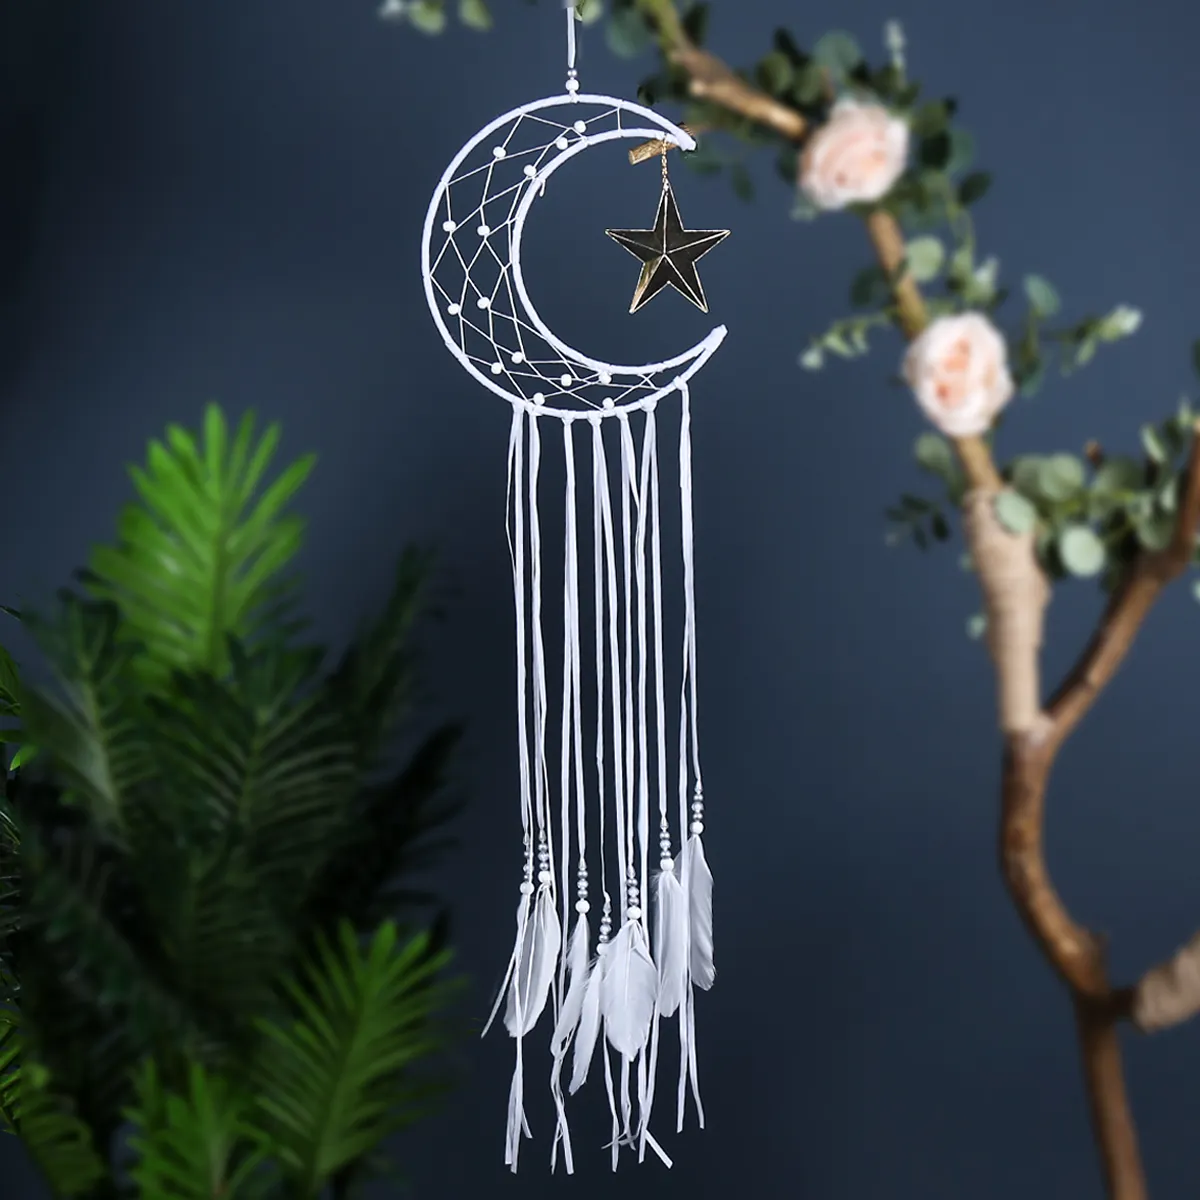 Custom Handmade Wind Chimes Hanging Art High-quality Moon Dream Catcher With Star Ornament Home Wall Decorations Gift For Friend